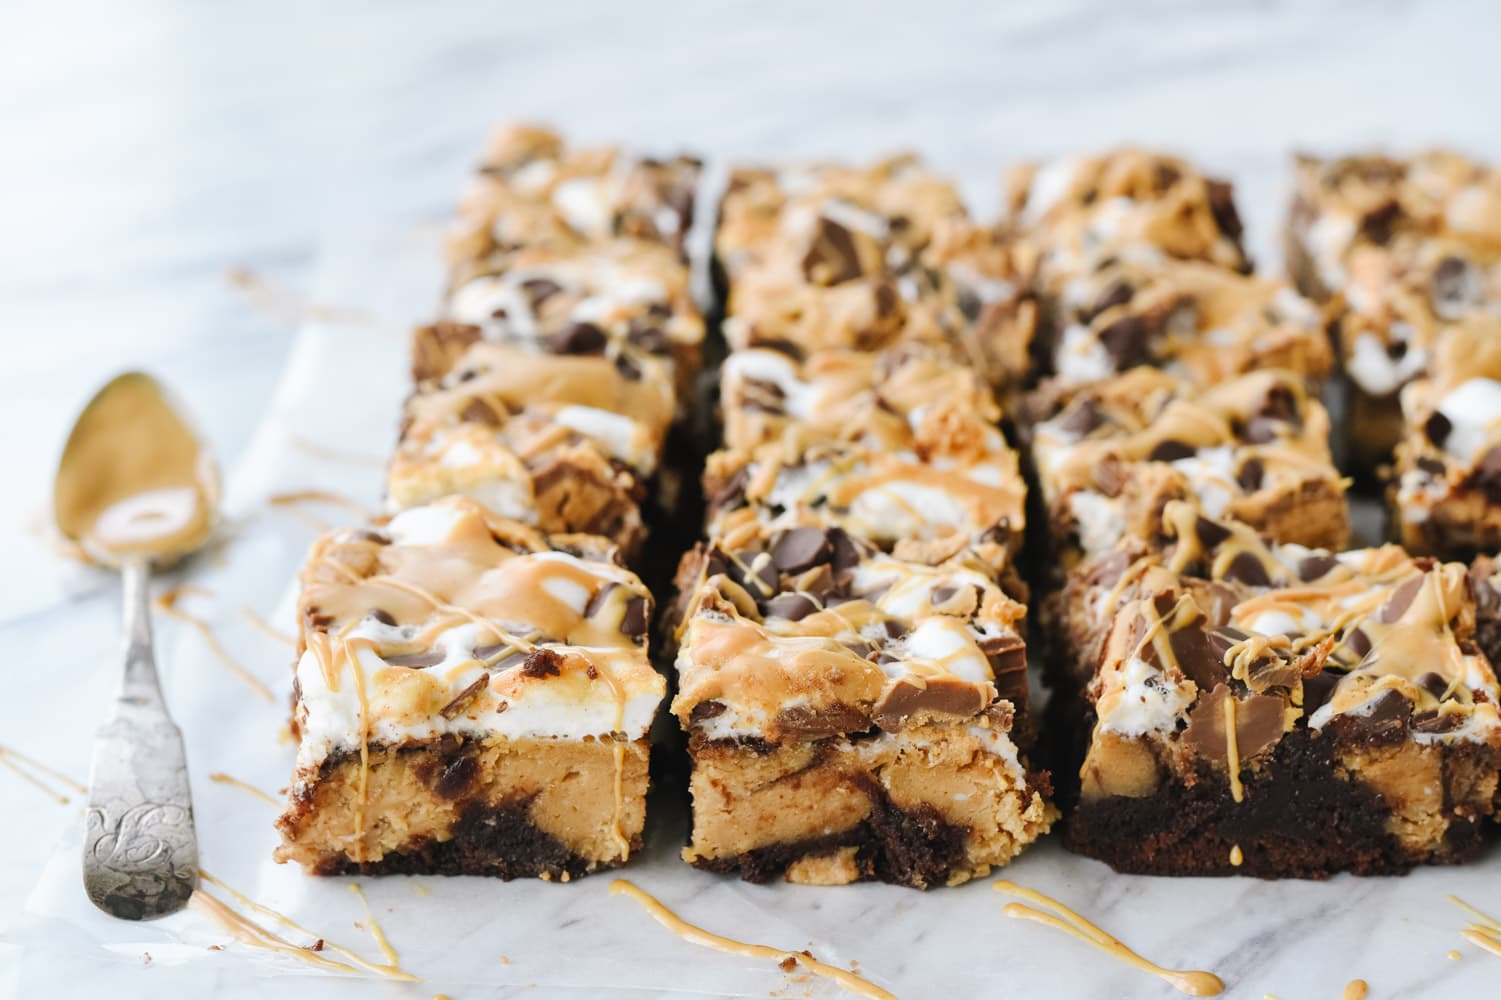 Peanut Butter cheesecake brownies cut into pieces